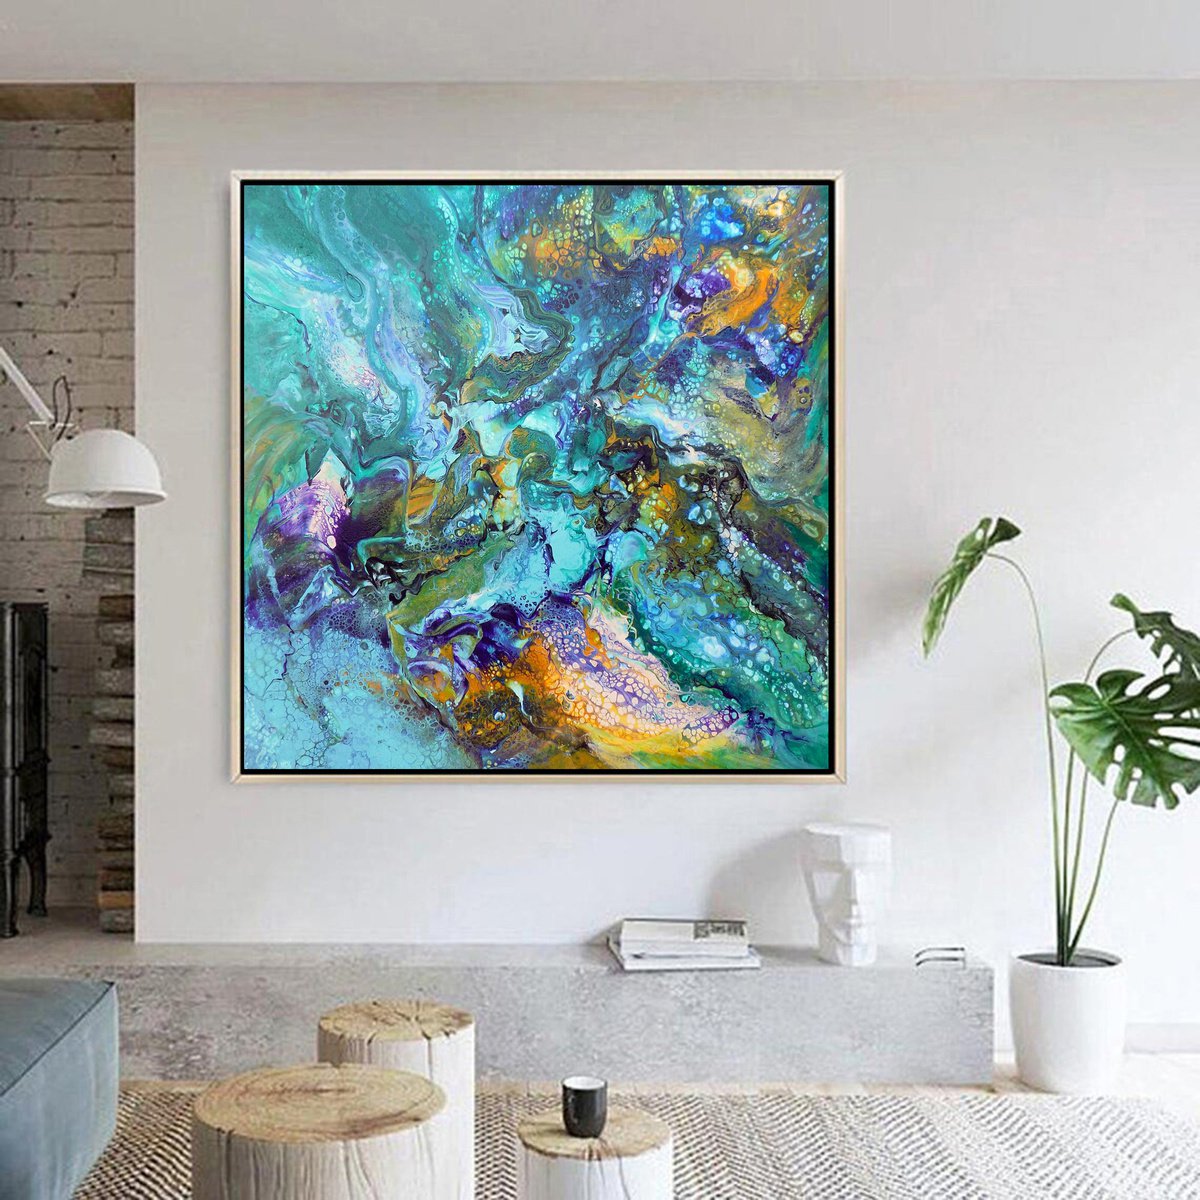 Large modern abstract painting art - Imagination Acrylic painting by ...